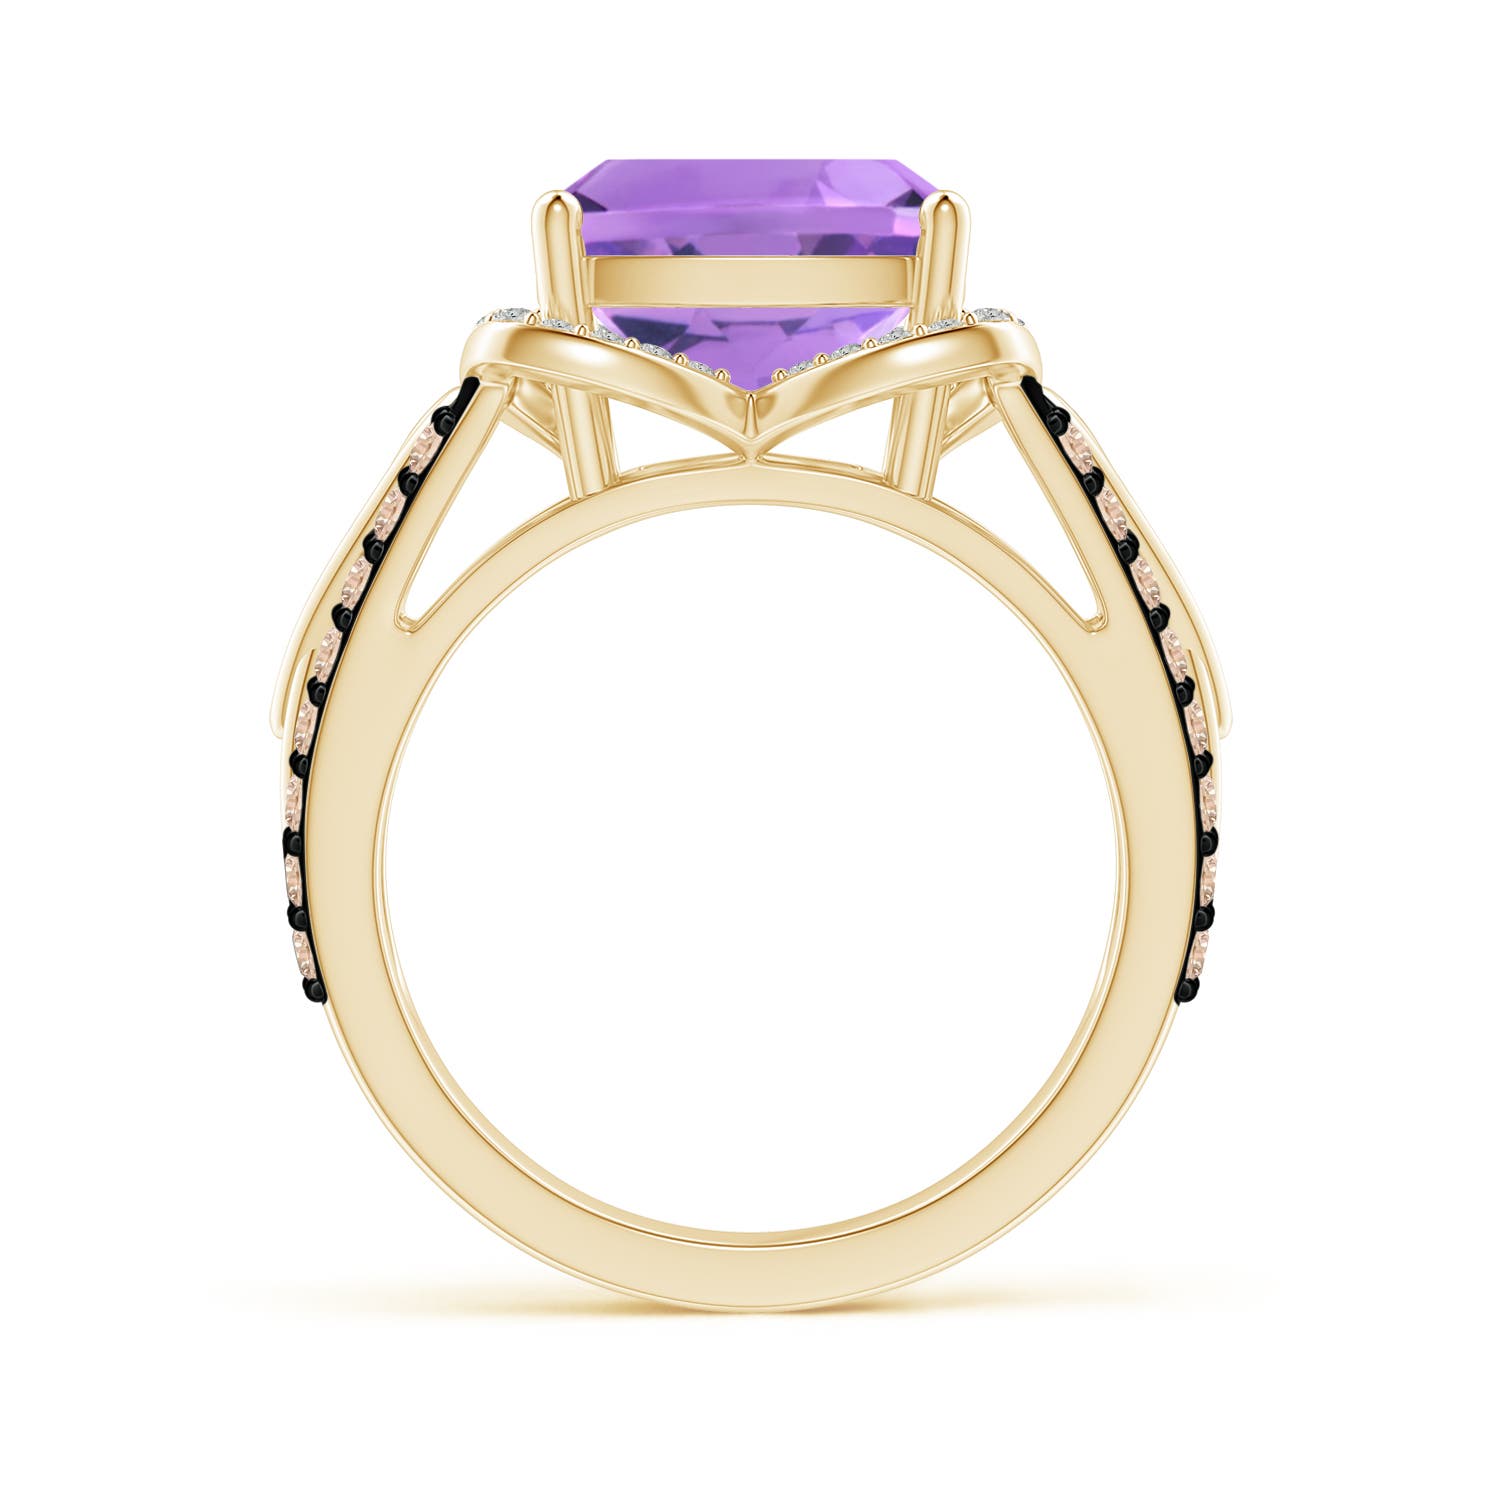 A - Amethyst / 4.41 CT / 14 KT Yellow Gold